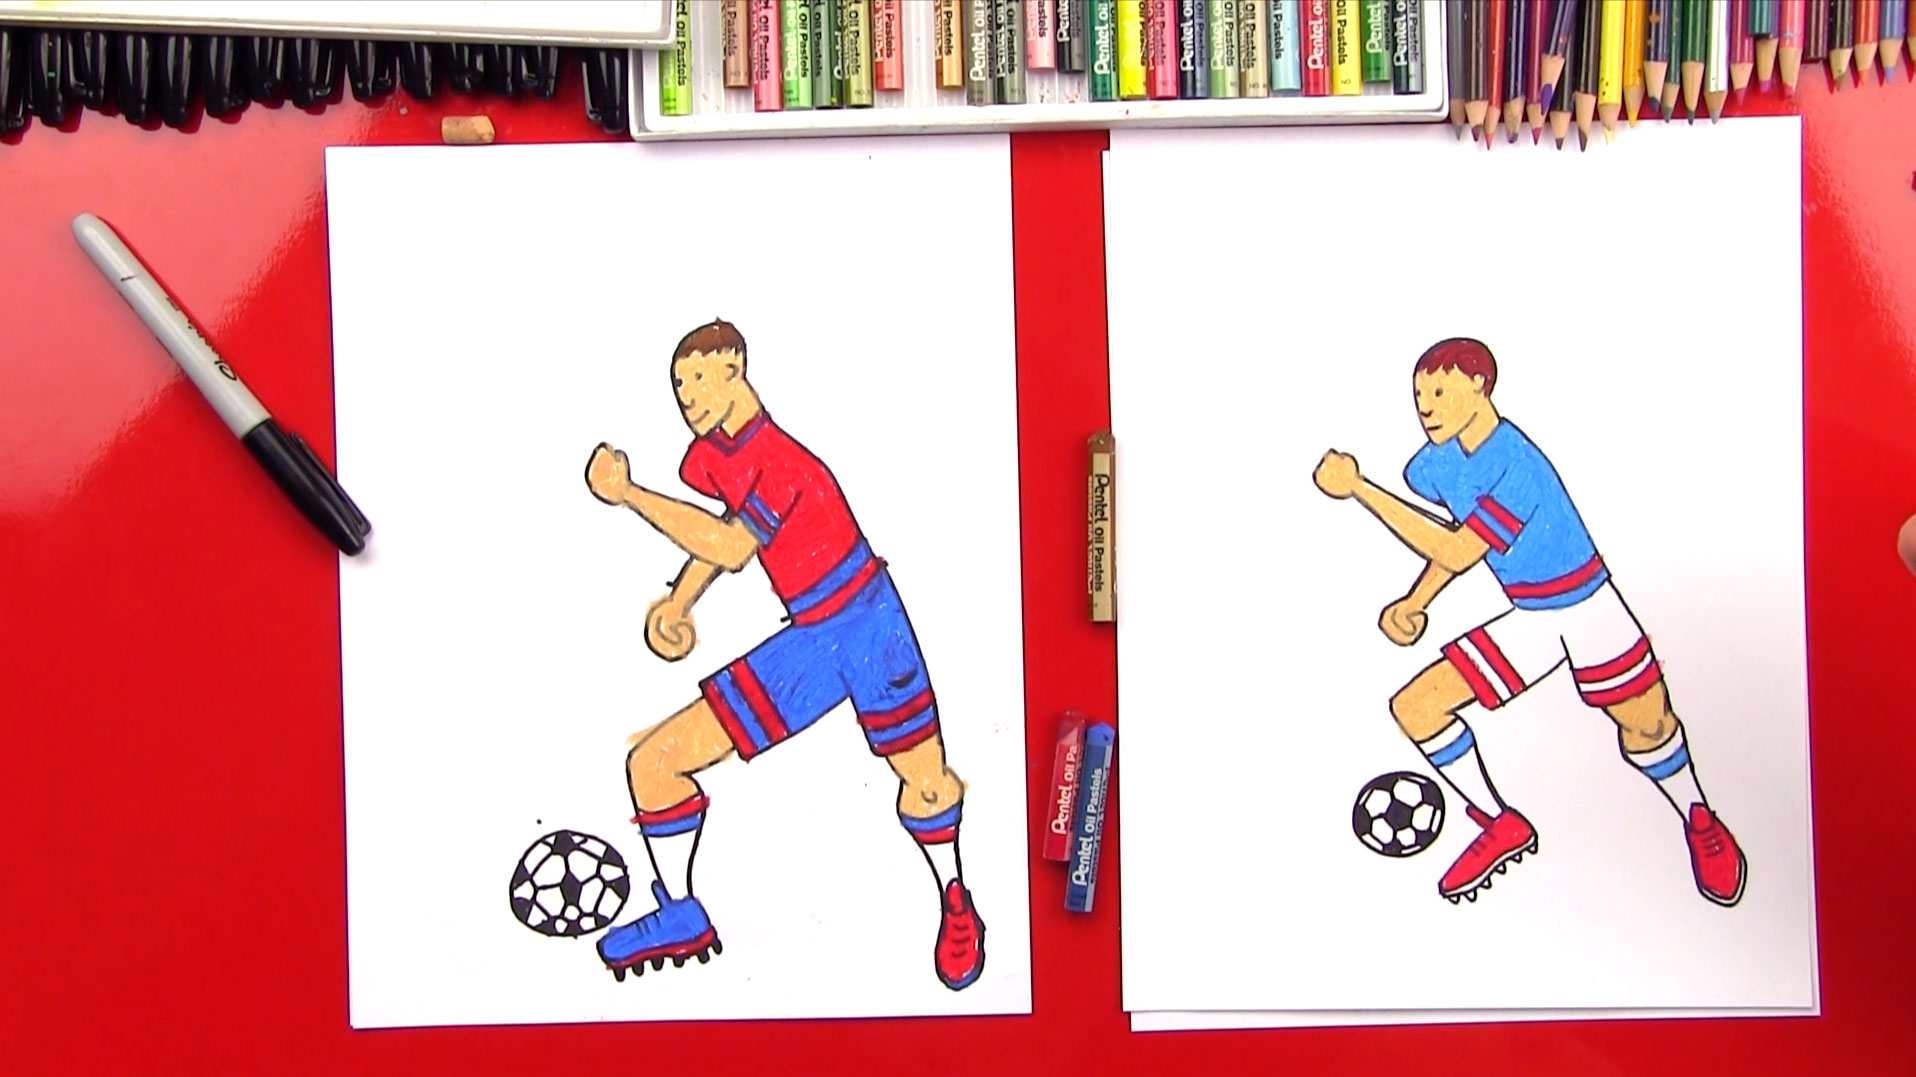 How to Draw a Soccer Ball Easy Step by Step Drawing Tutorial for Beginners  - How to Draw Step by Step Drawing Tutorials